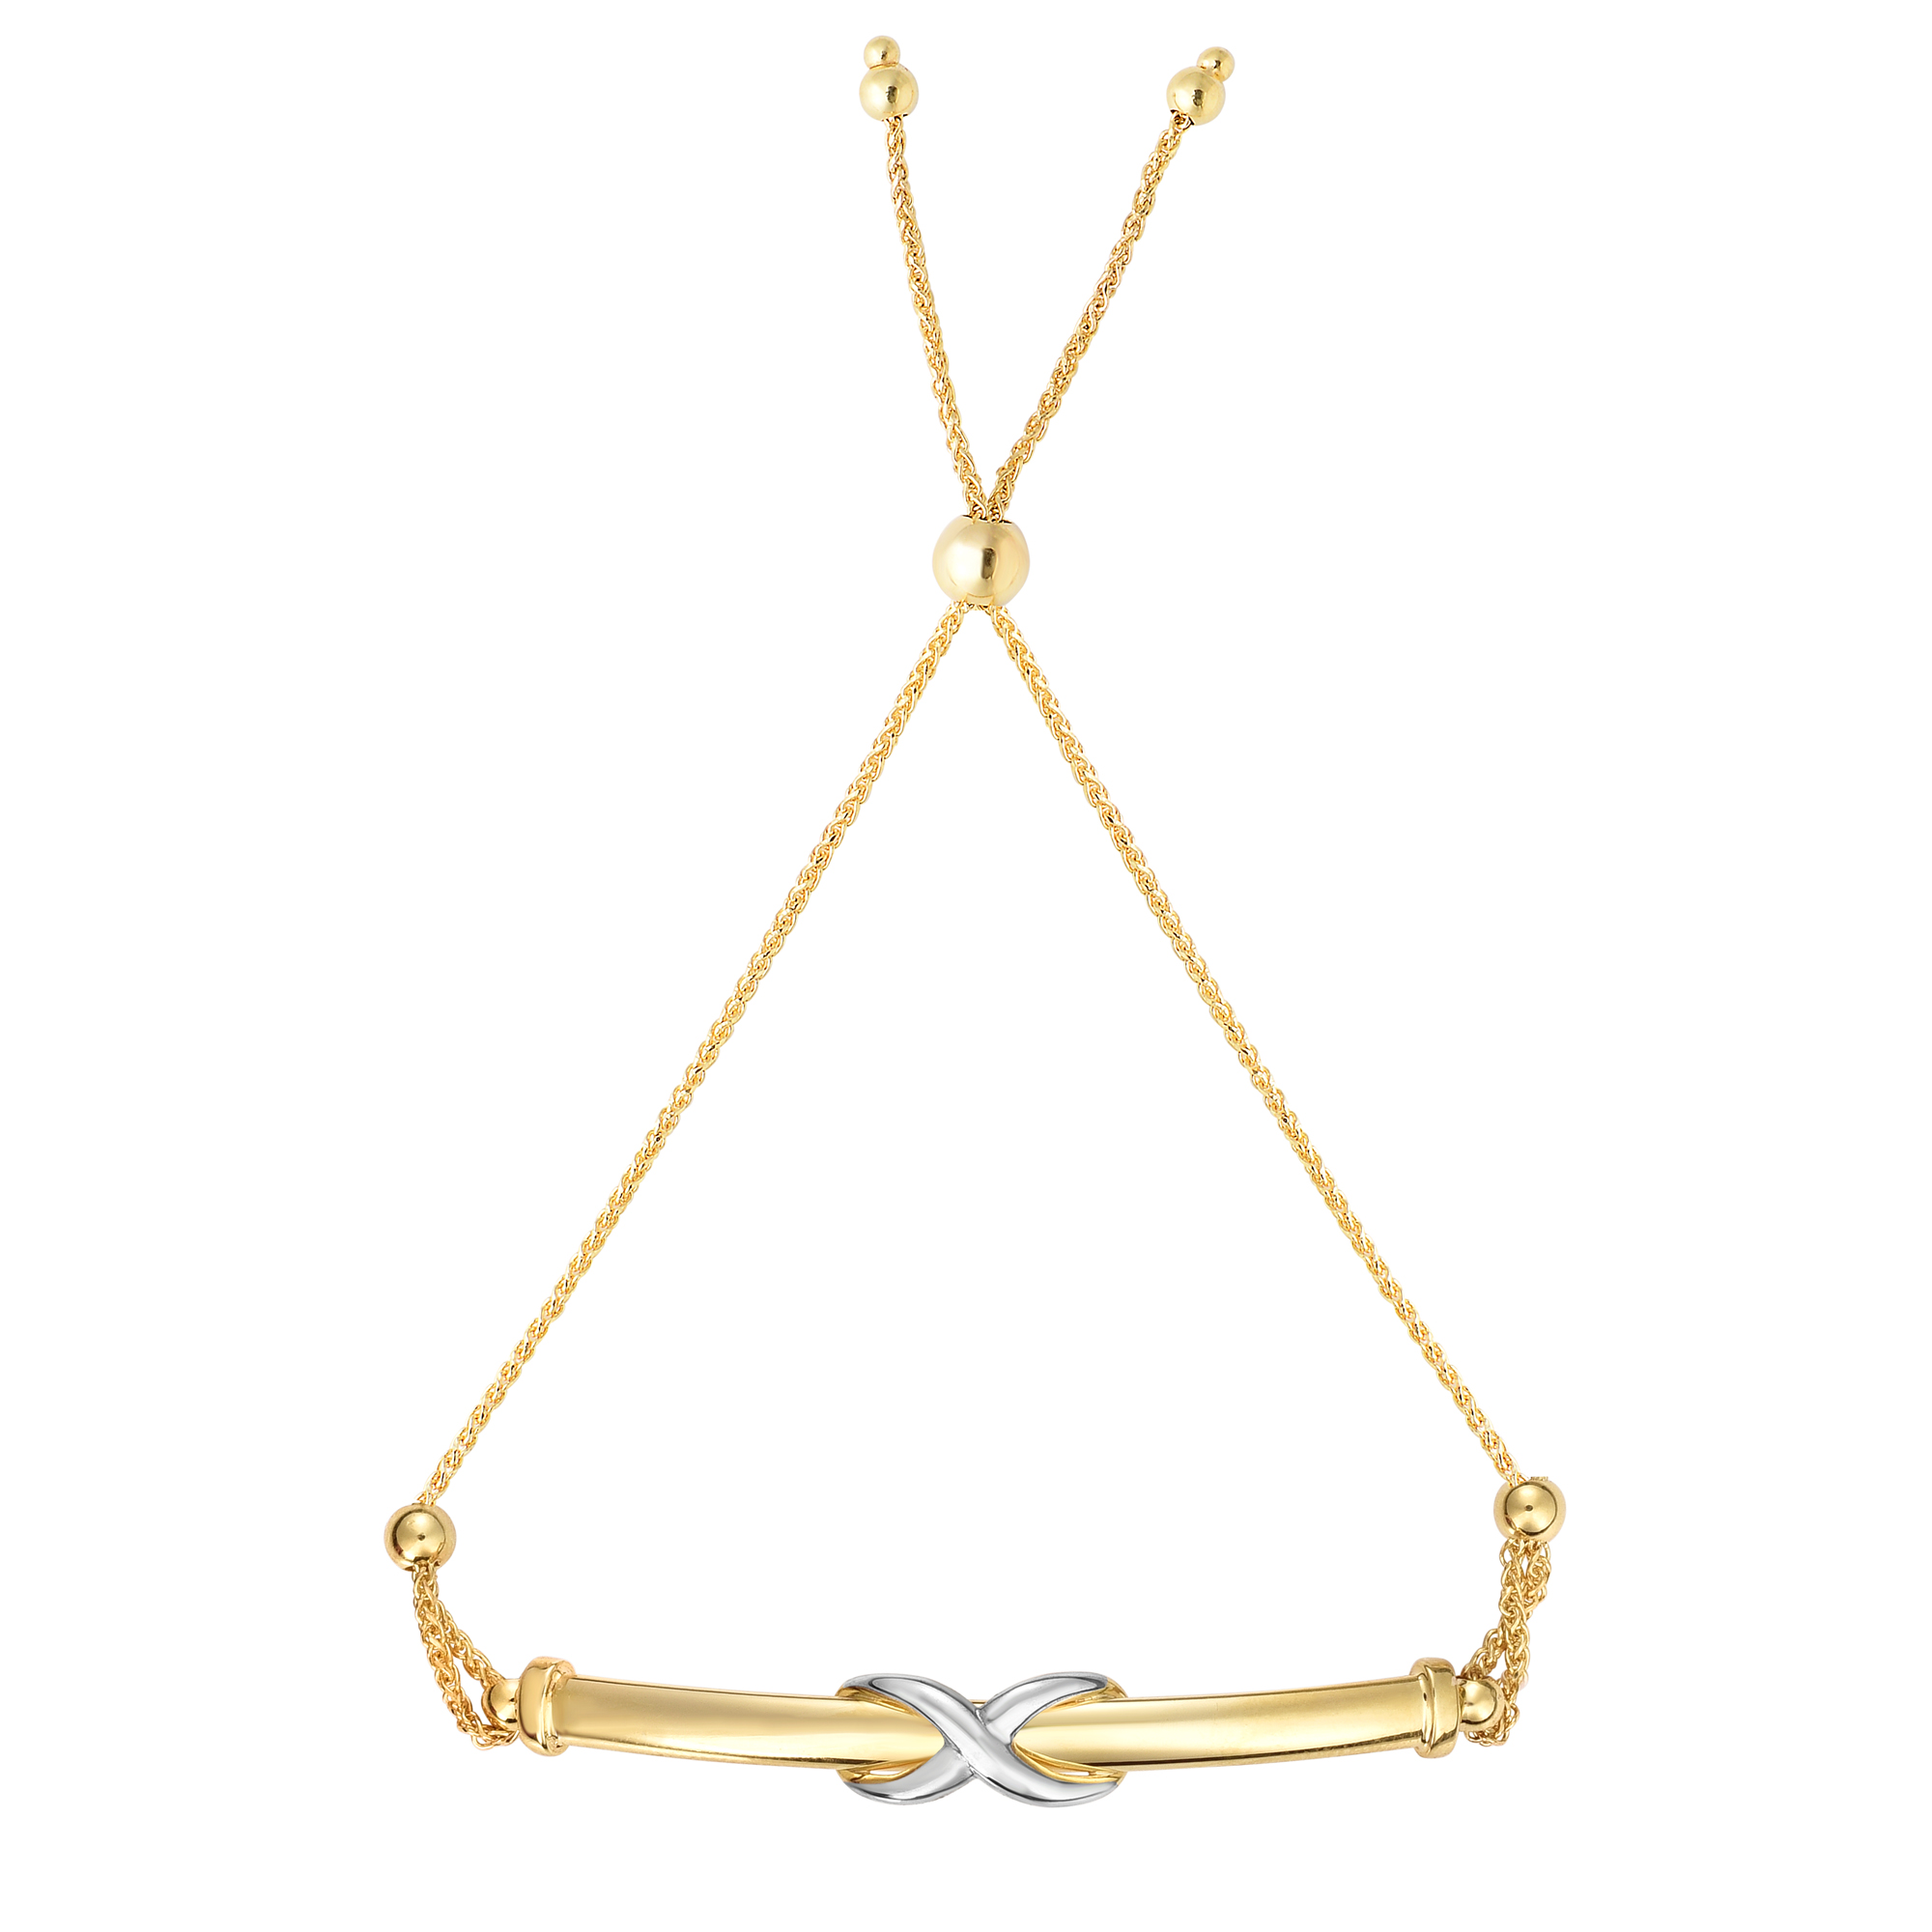 14kt Gold 9.25 inches Yellow+White Finish Chain:1mm+Pendant:6mm Shiny Bar Adjustable Friendship Bracelet with Draw String Clasp